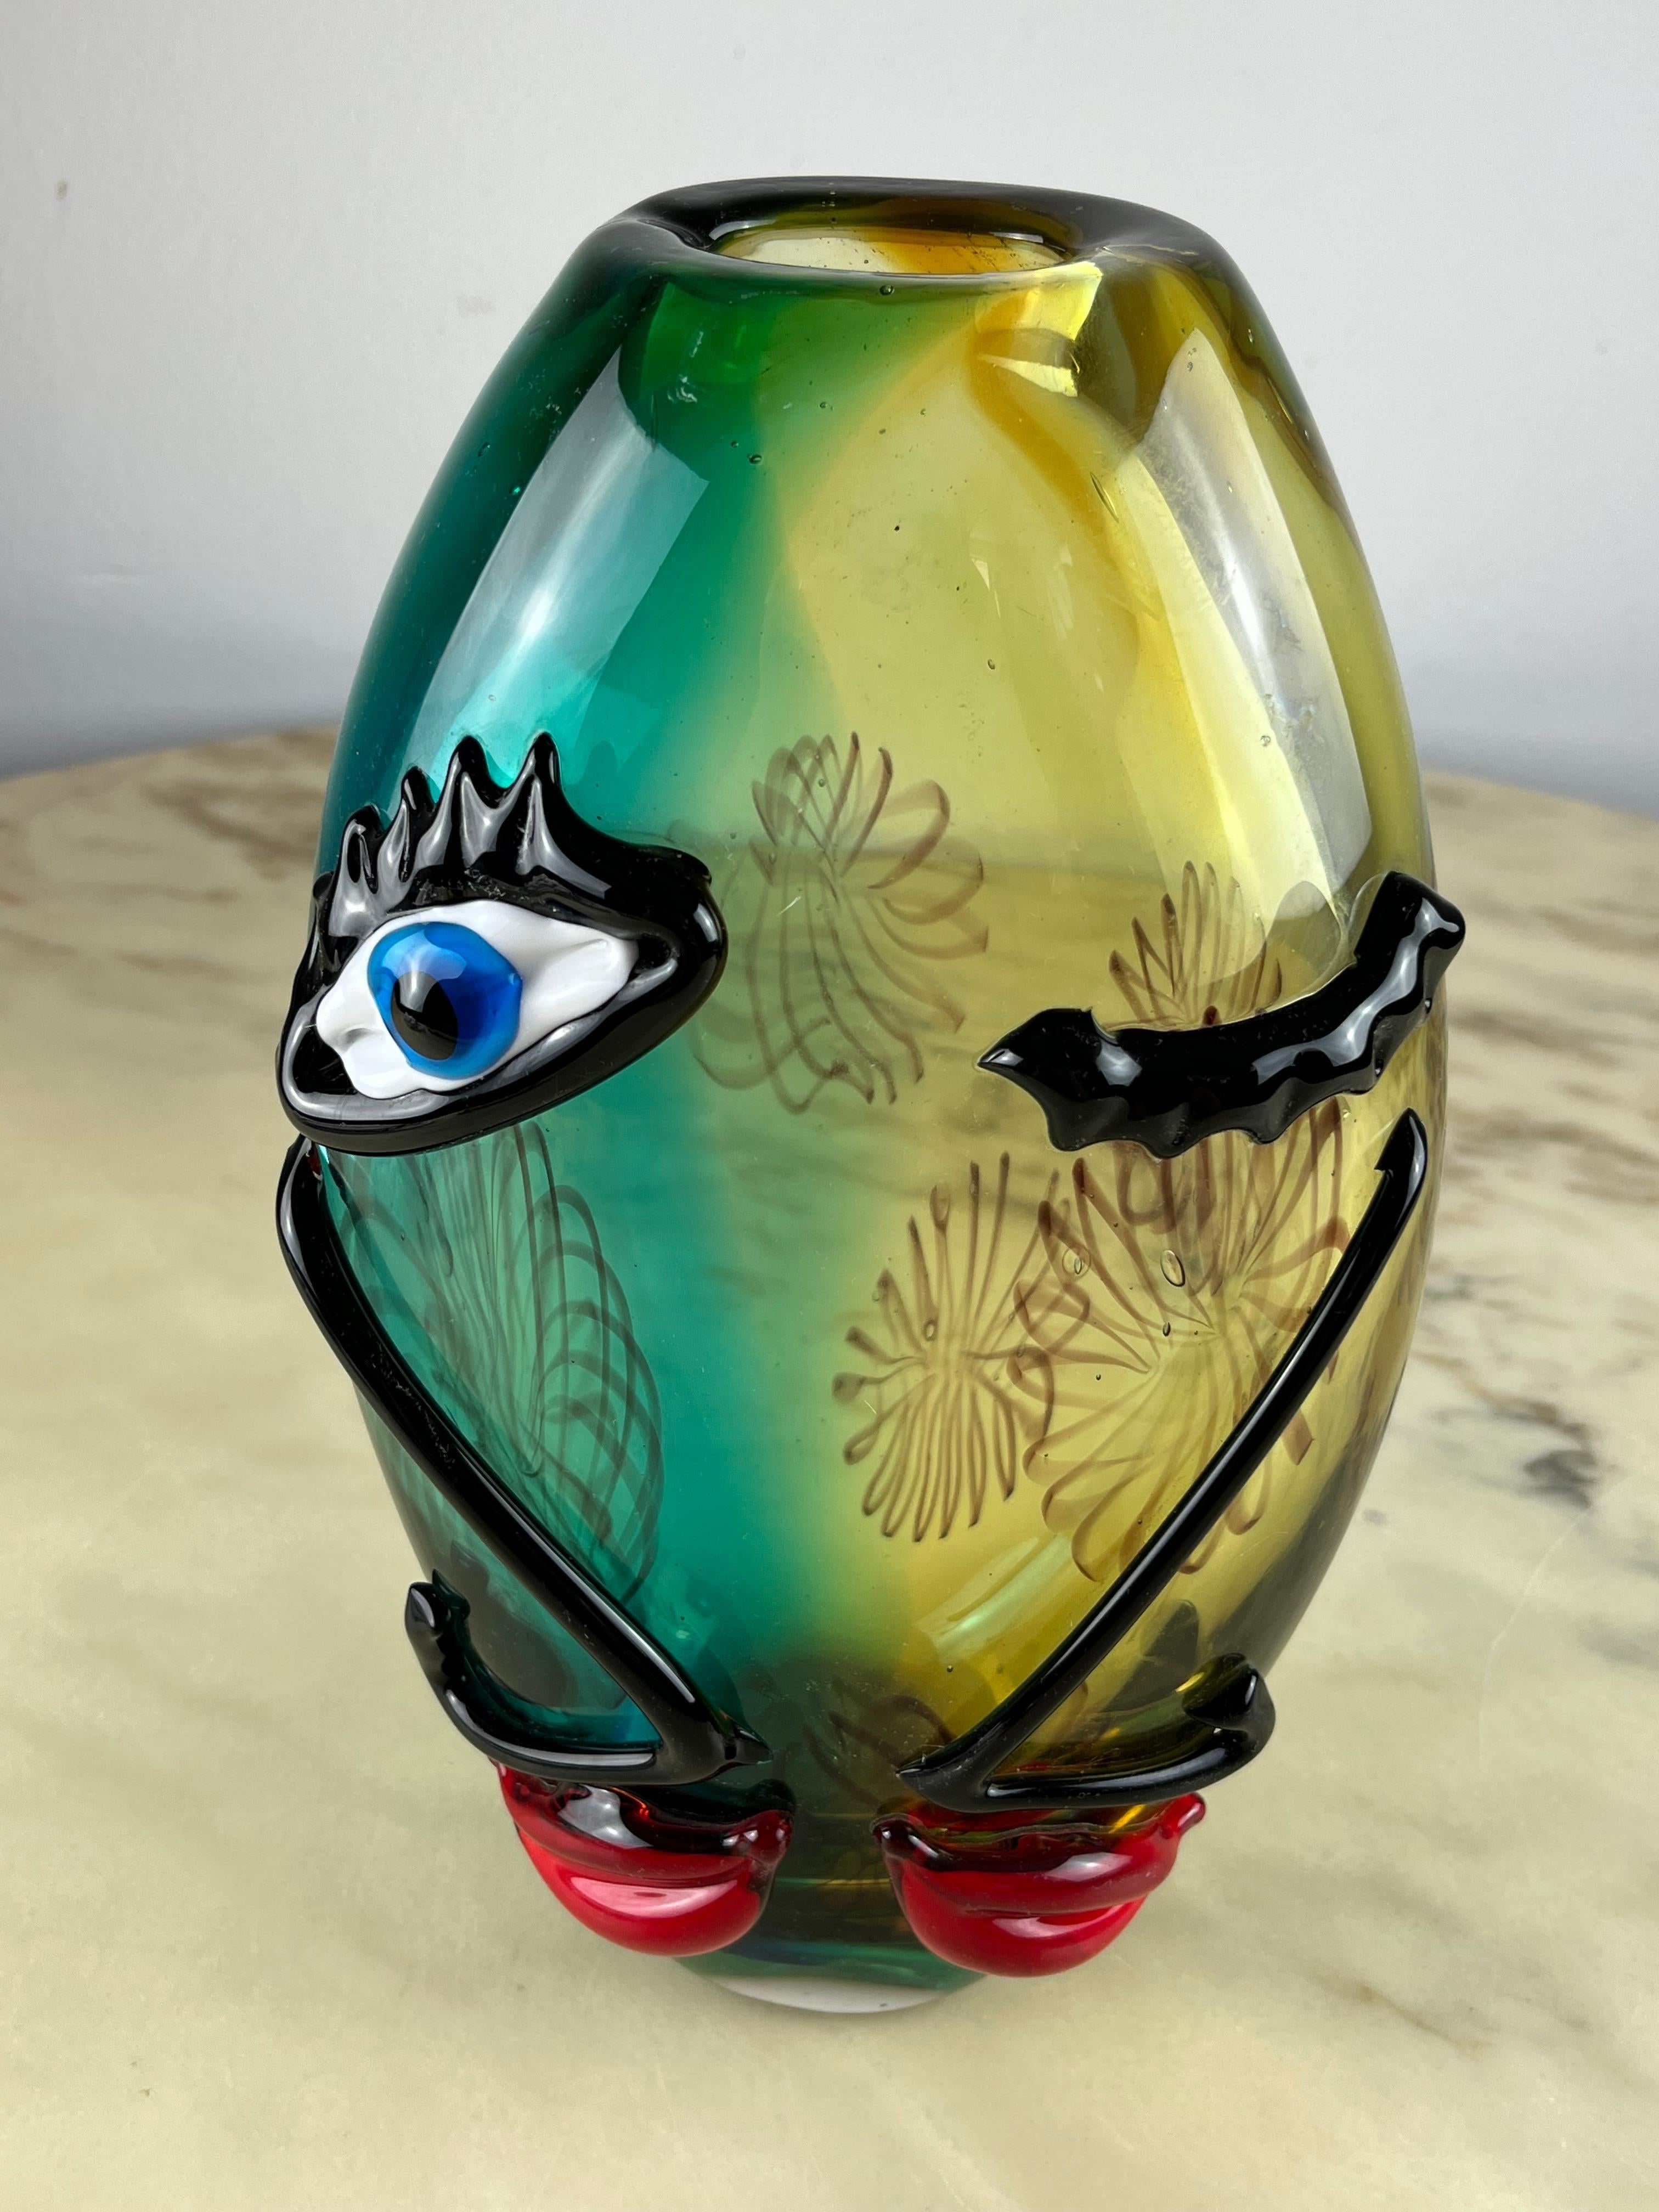 Multicolor Murano glass vase, attributed to Alfredo Barbini, 1980s
Purchased by my grandparents from a prestigious Venetian merchant. Intact, small signs of aging.